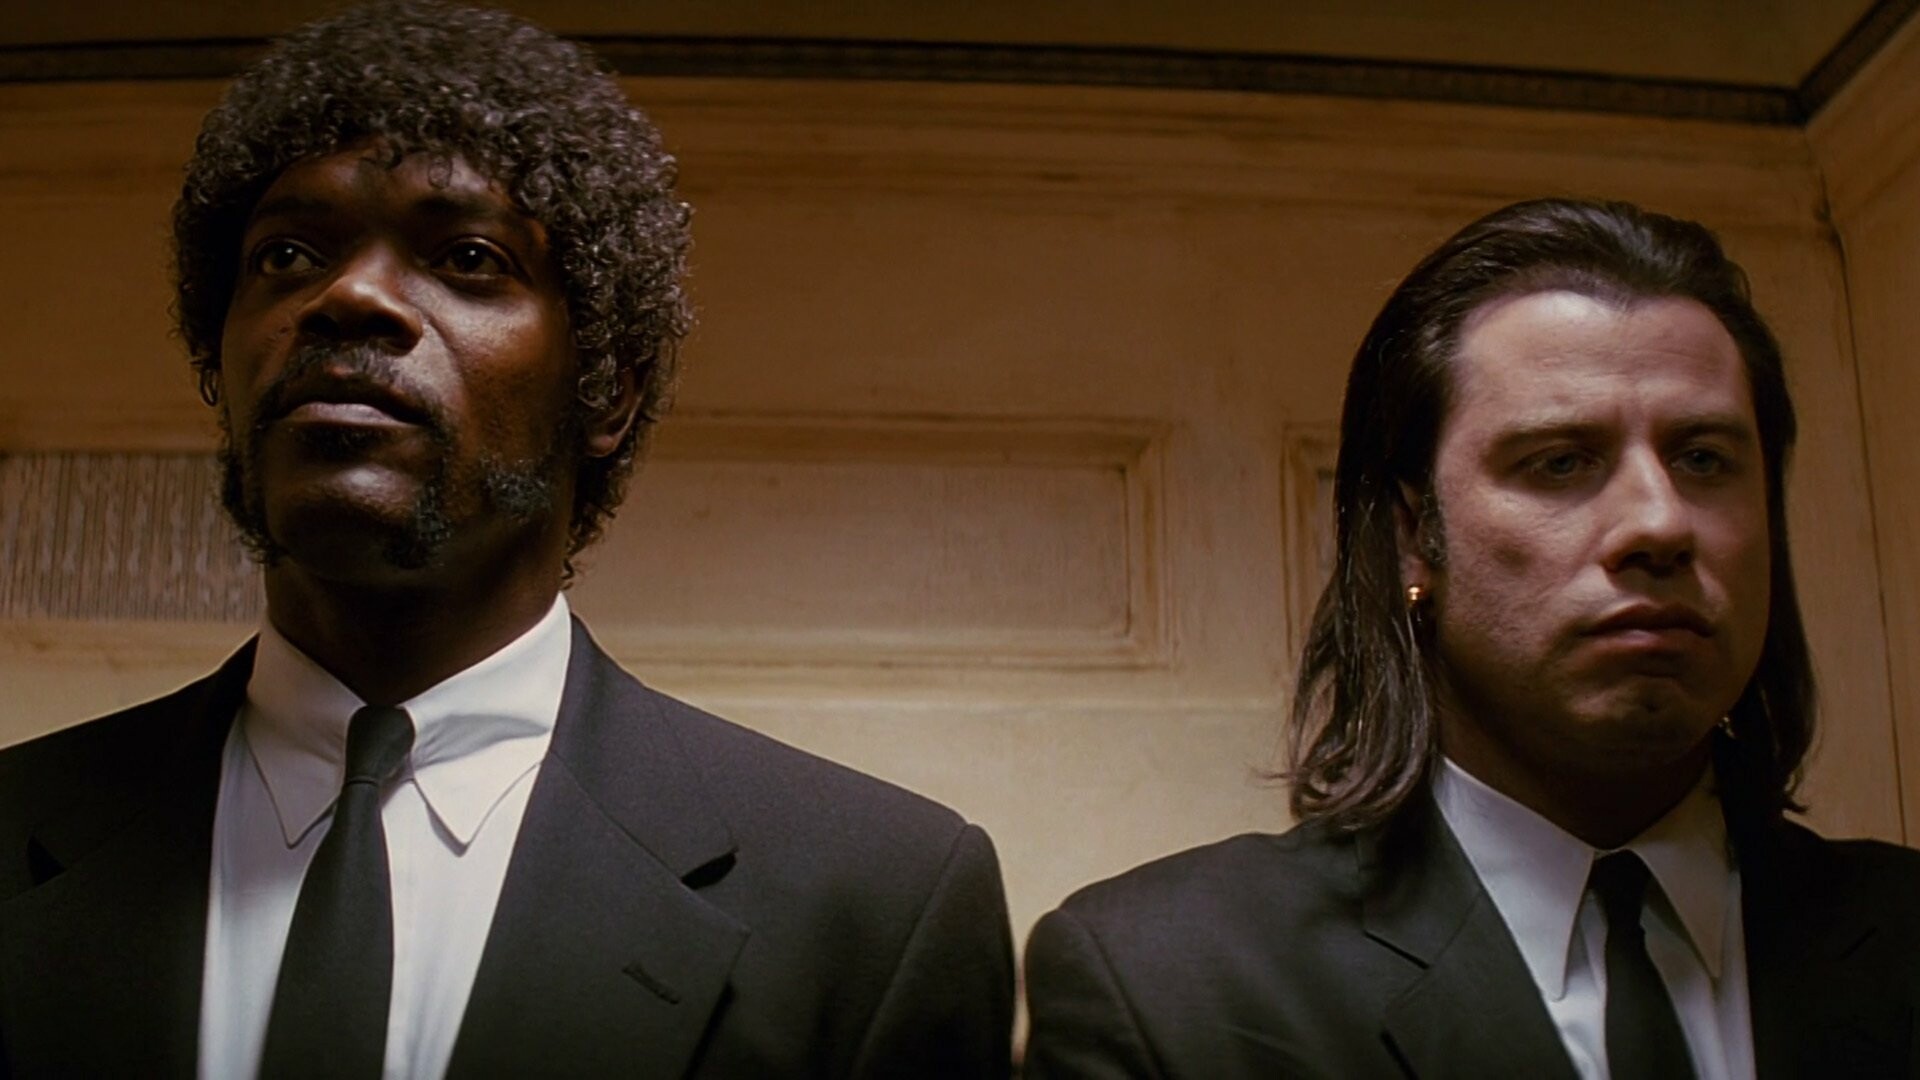 Pulp Fiction: The film won the Palme d'Or at the 1994 Cannes Film Festival, Vincent and Jules. 1920x1080 Full HD Background.